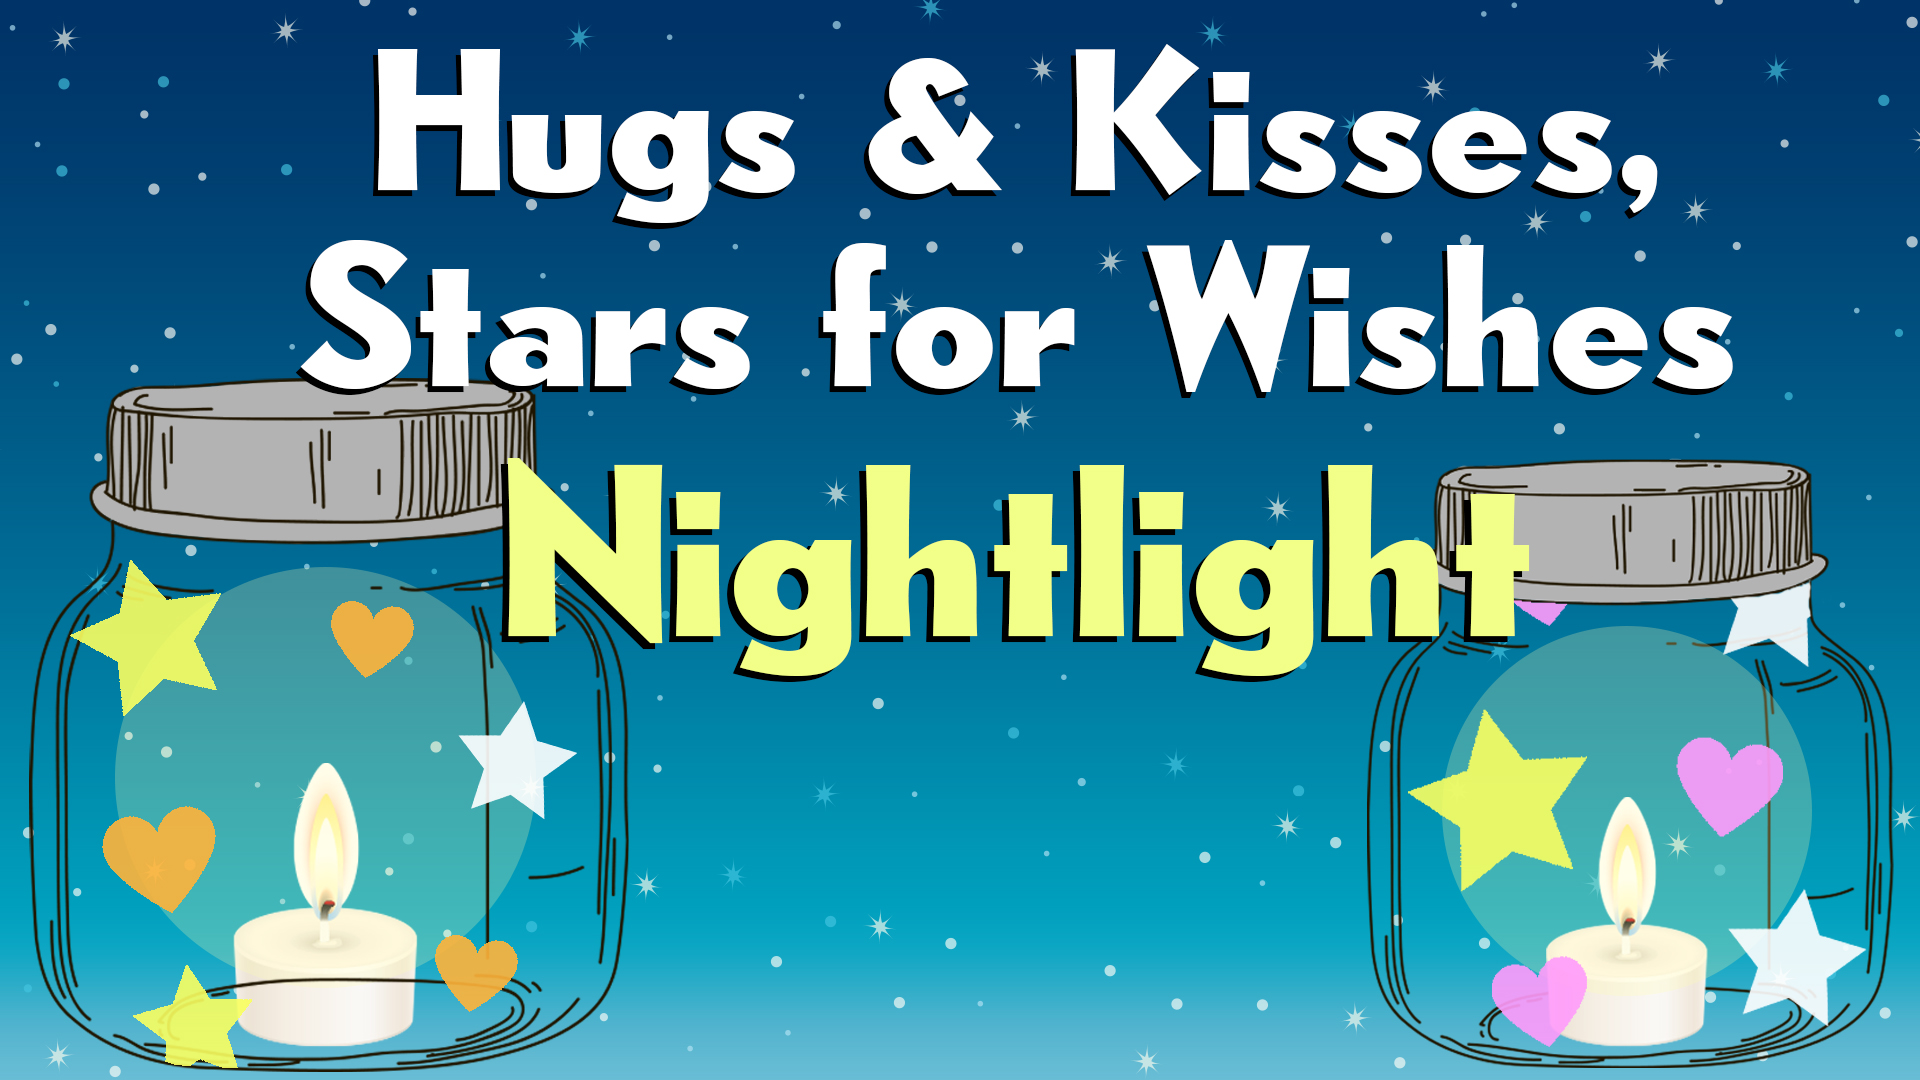 Image reads "Hugs & Kisses, Stars for Wishes Nightlight" against a starry night background. There are two jars with candles in them decorated with hearts and stars. 